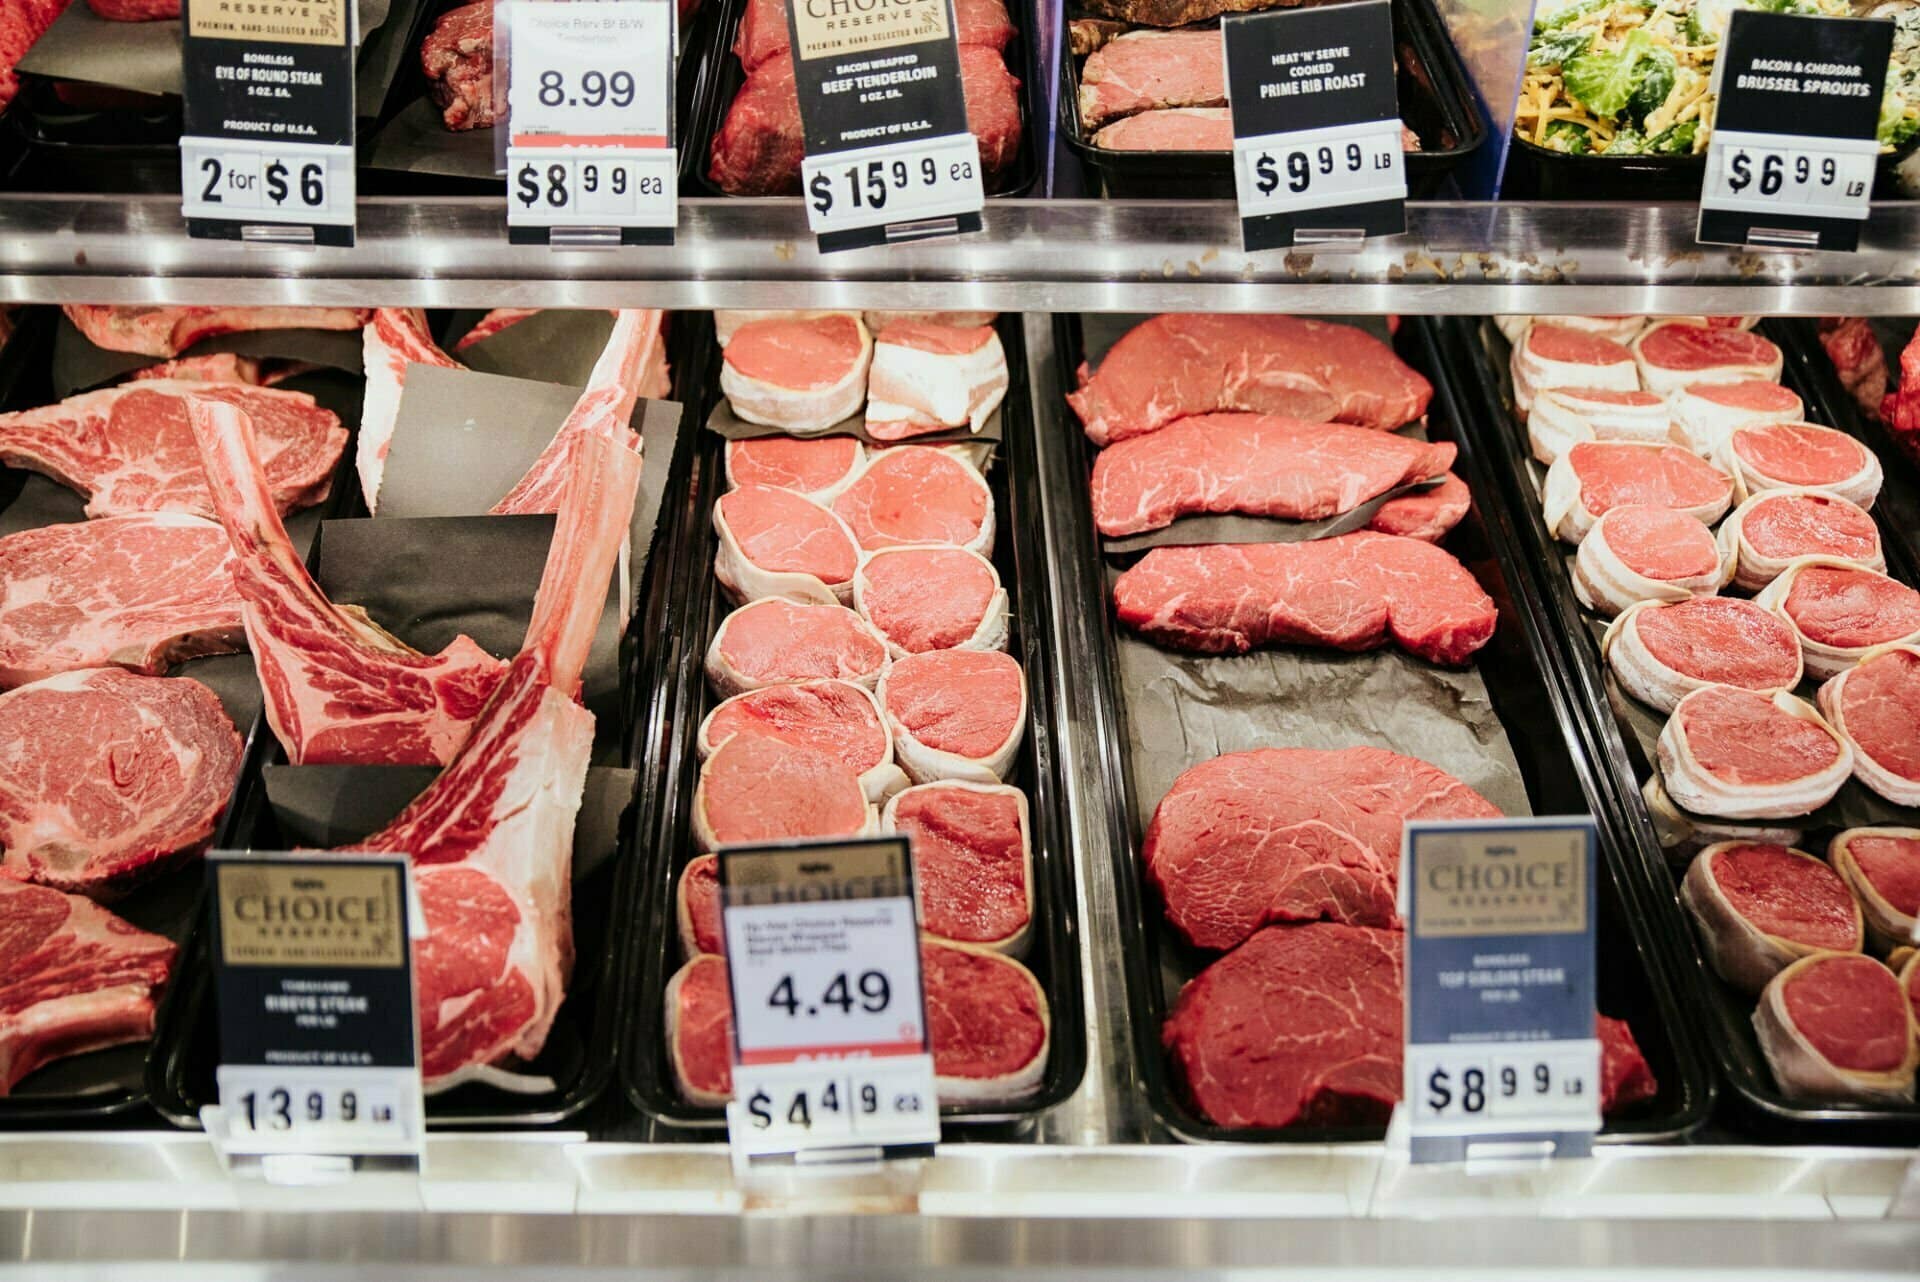 A variety of different meat cuts in a grocery store meat case.